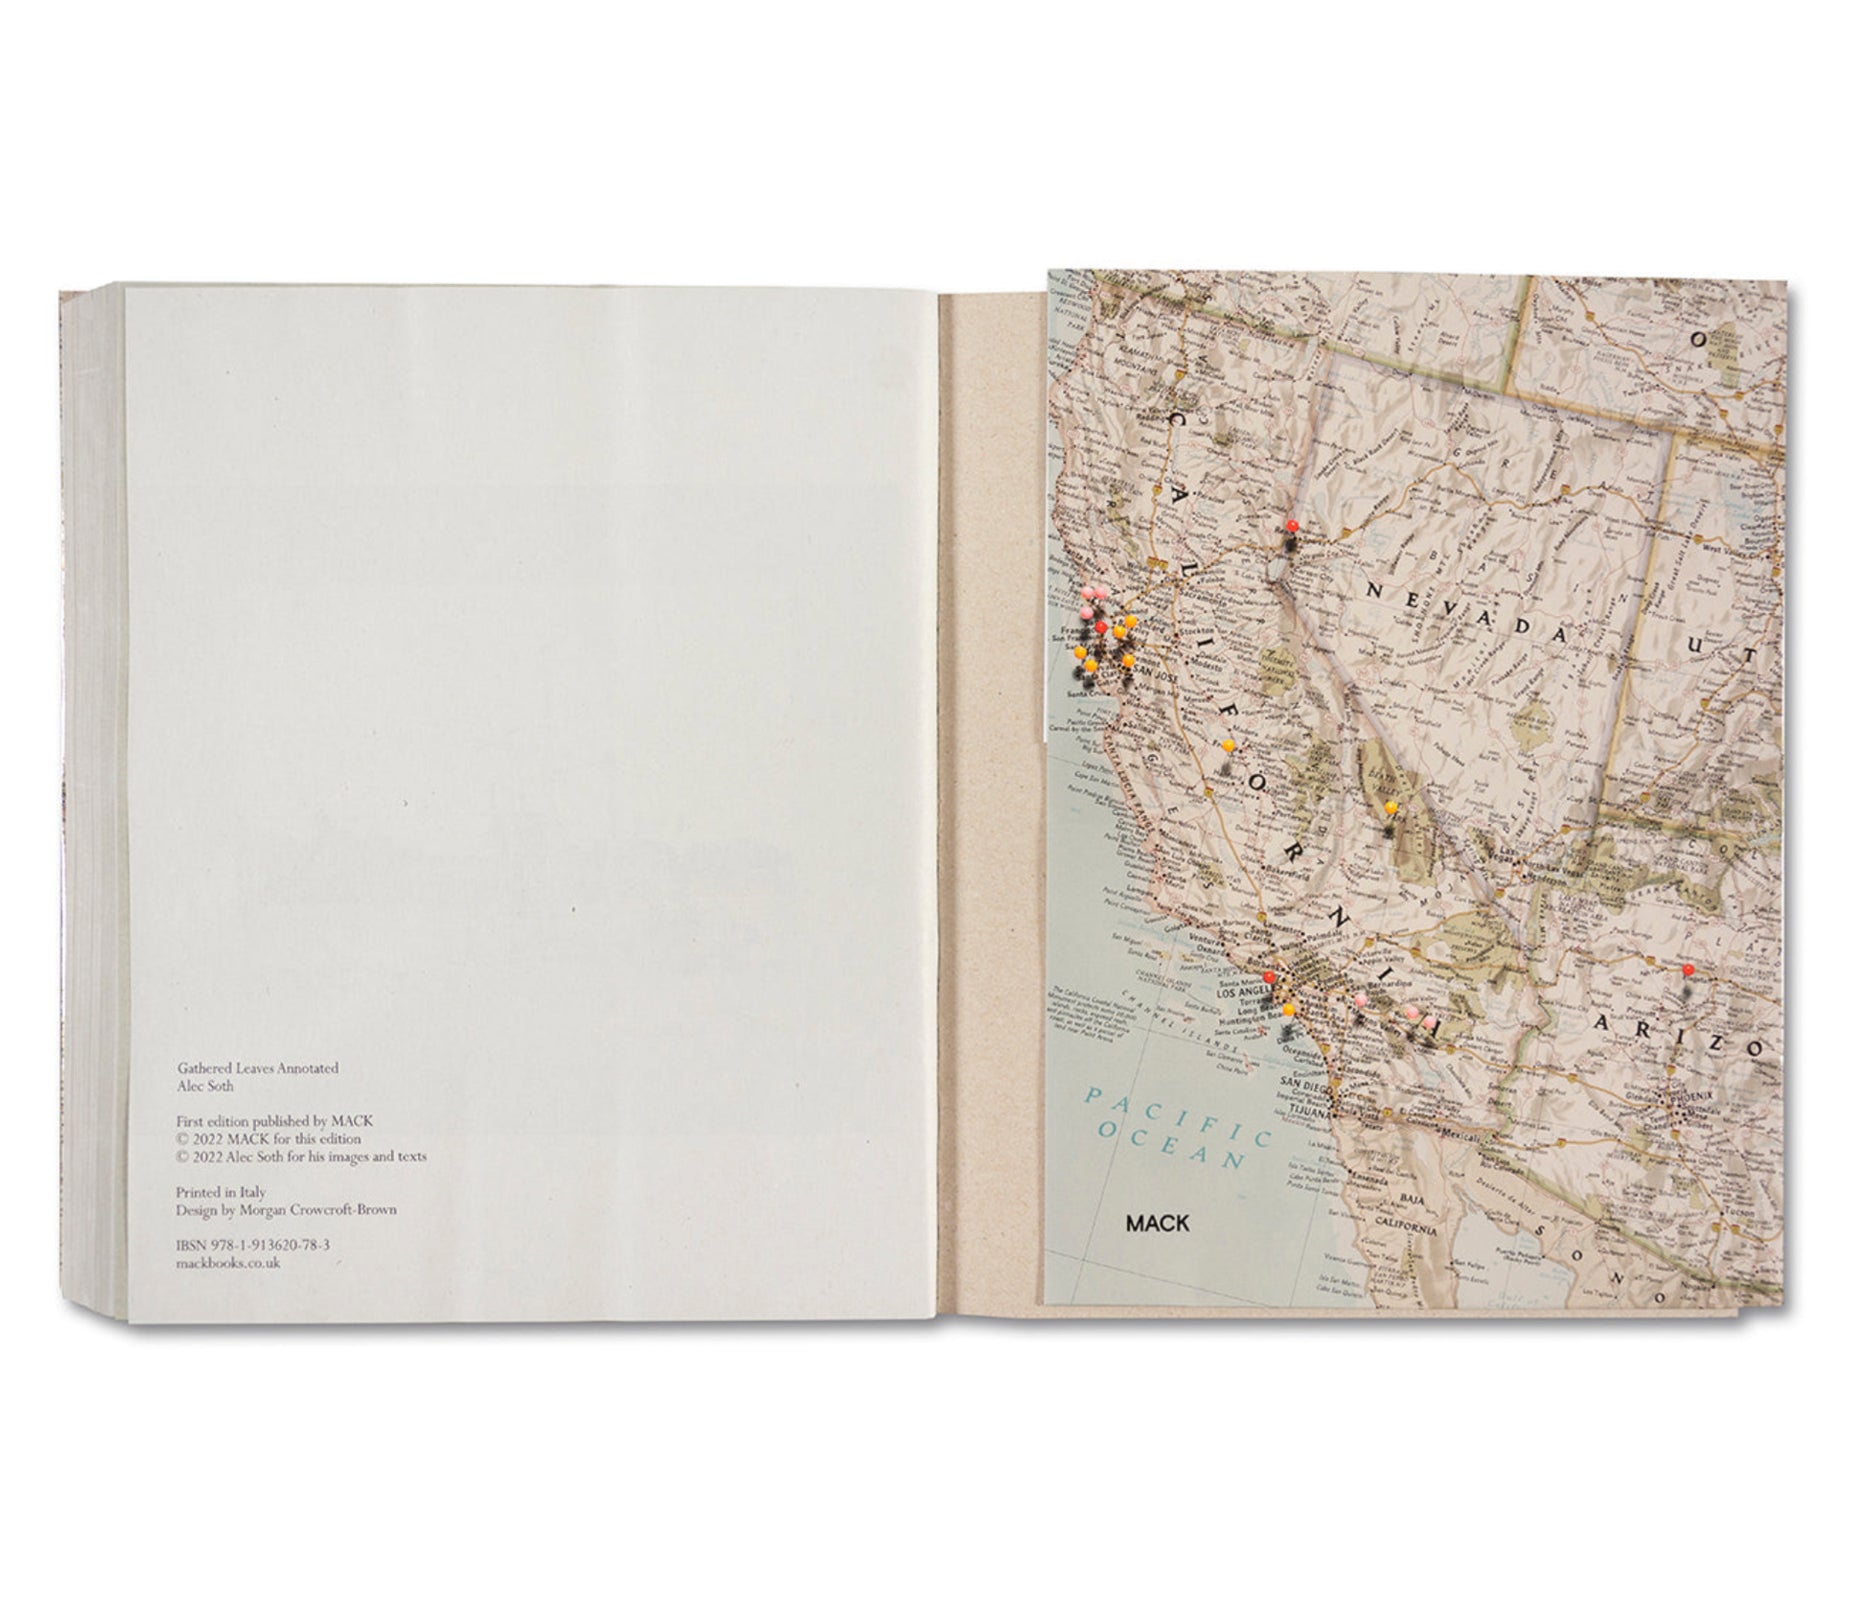 GATHERED LEAVES ANNOTATED by Alec Soth [JAPANESE EDITION SIGNED] 窶�  twelvebooks